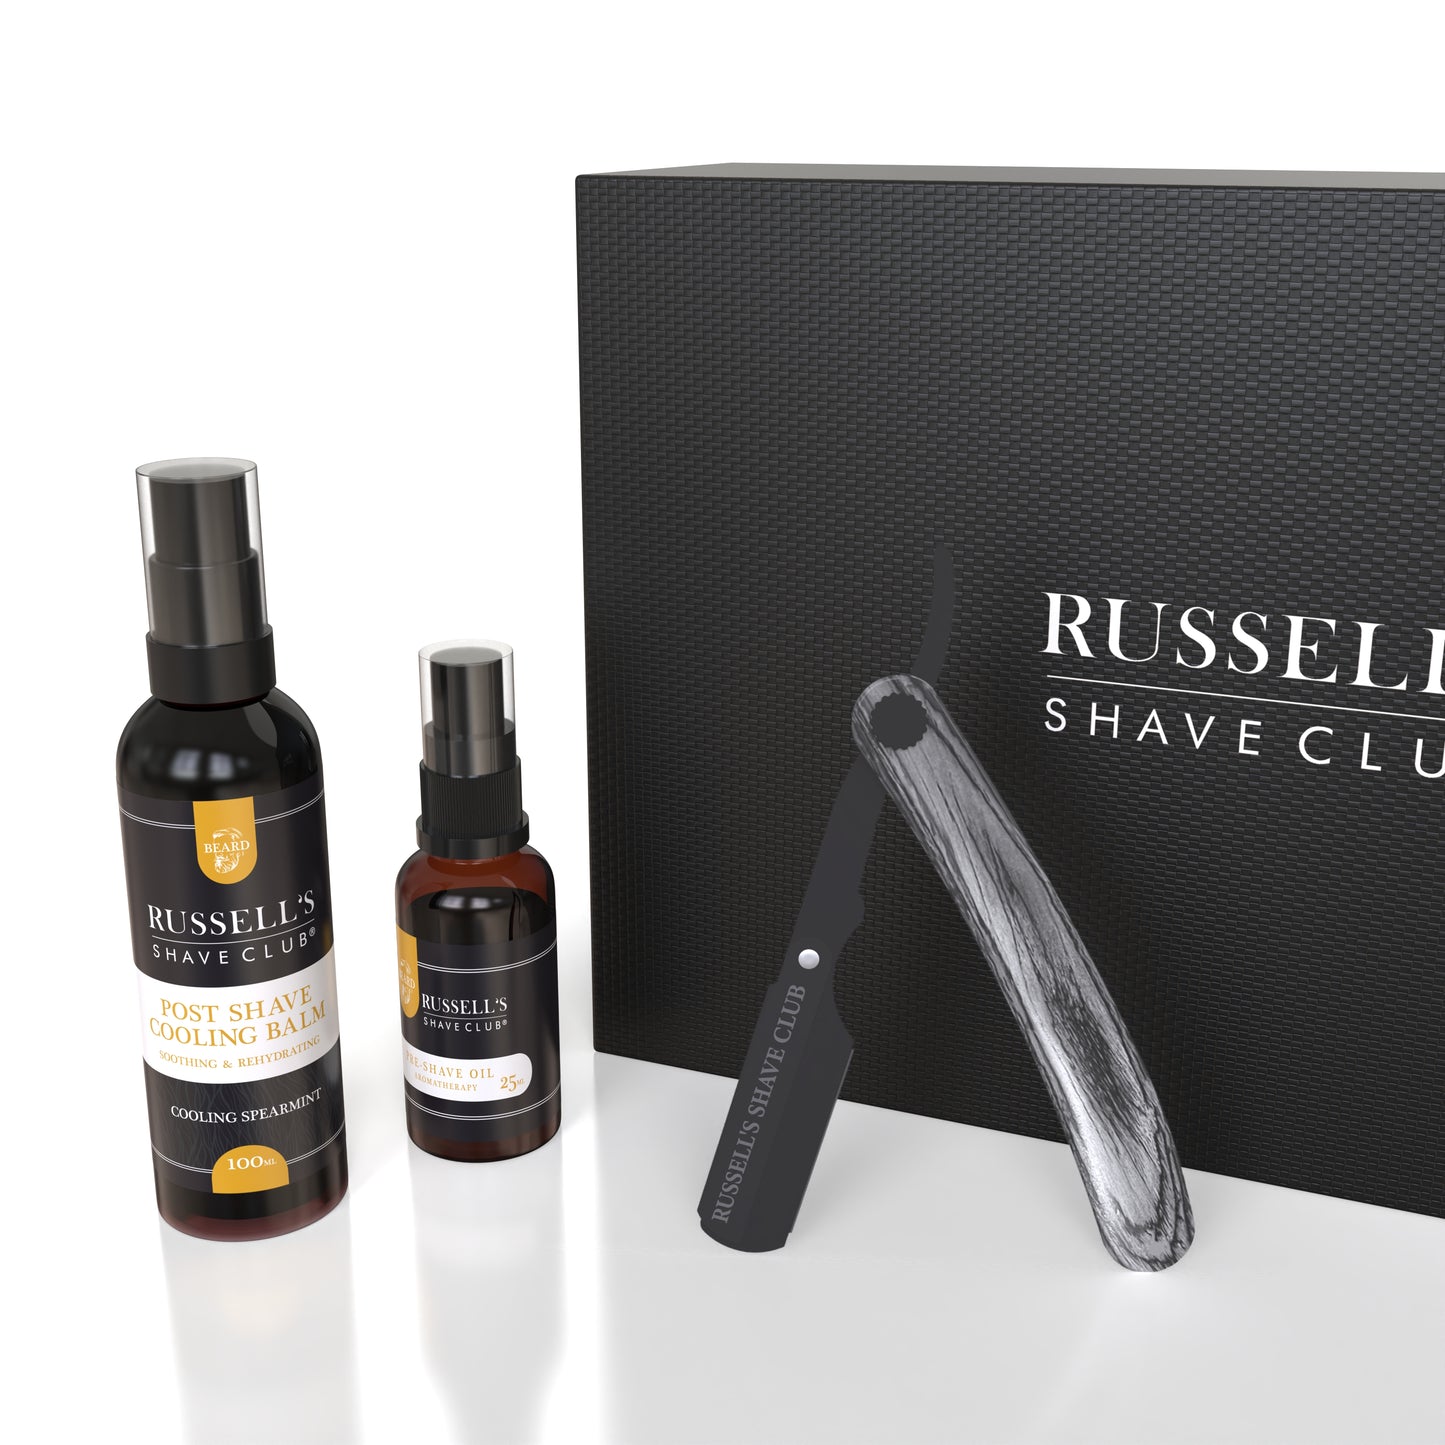 The Ultimate Beard Shaping Trio: Cut Throat Razor, Pre-Shave Oil, and Post-Shave Balm Set